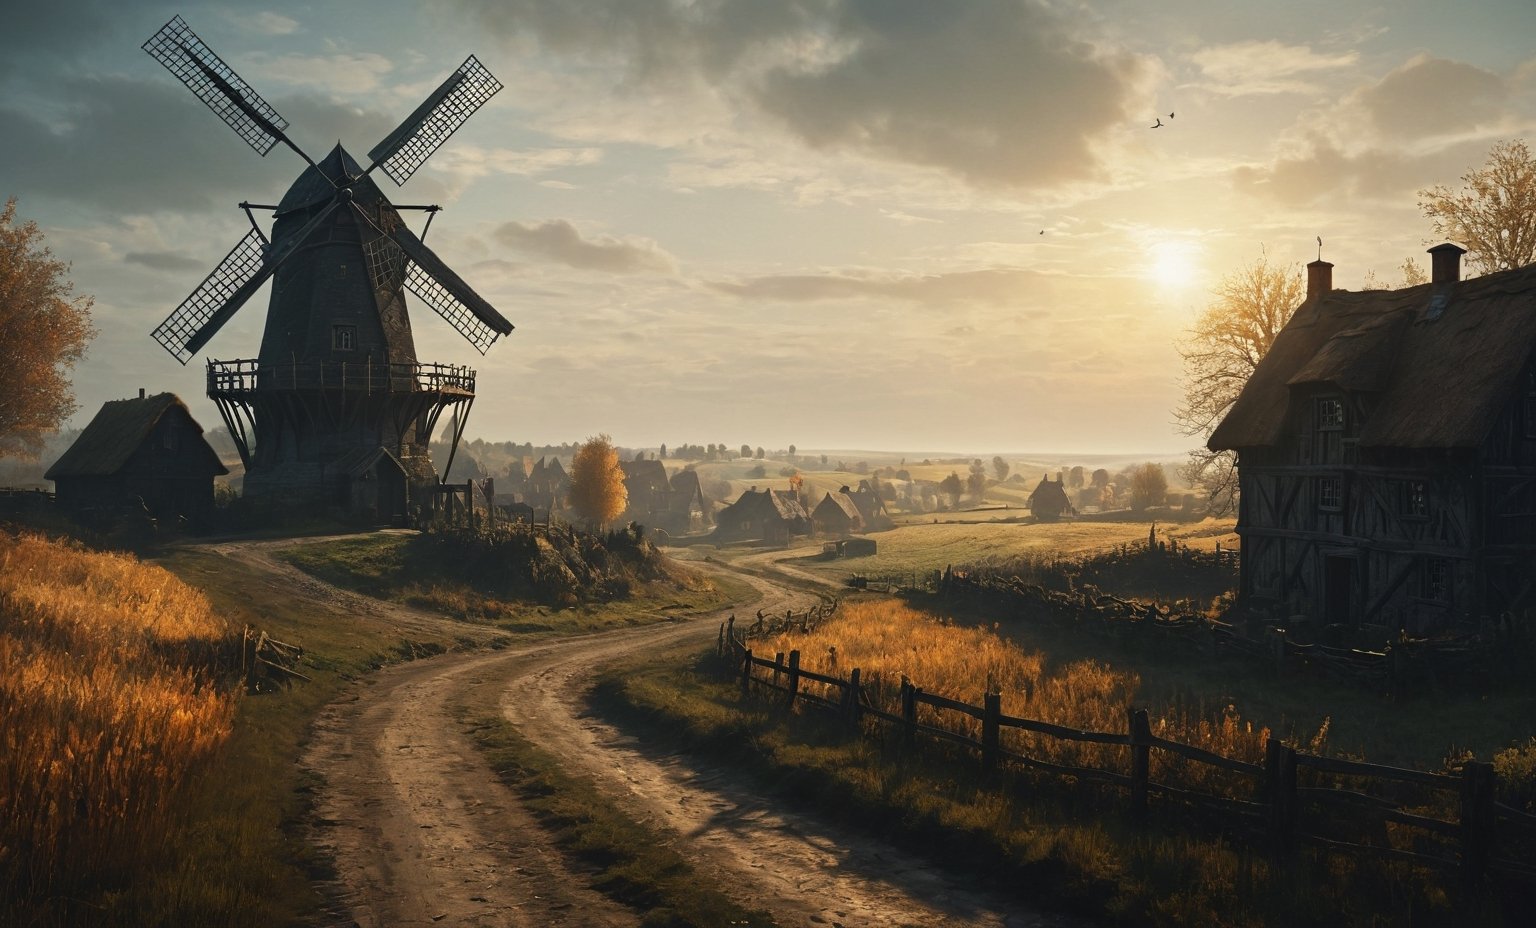 A shot from on a road of a small Medieval English style hamlet, landscape, a windmill, town house, barn, The Witcher 3 Concept Art, , low visibility, golden hour sunlight, few crop fields in distance, mysterious scene, dark, fantasy art, Movie Still, moody colours,Landskaper, newhorrorfantasy_style,darkart, cinematic moviemaker style,